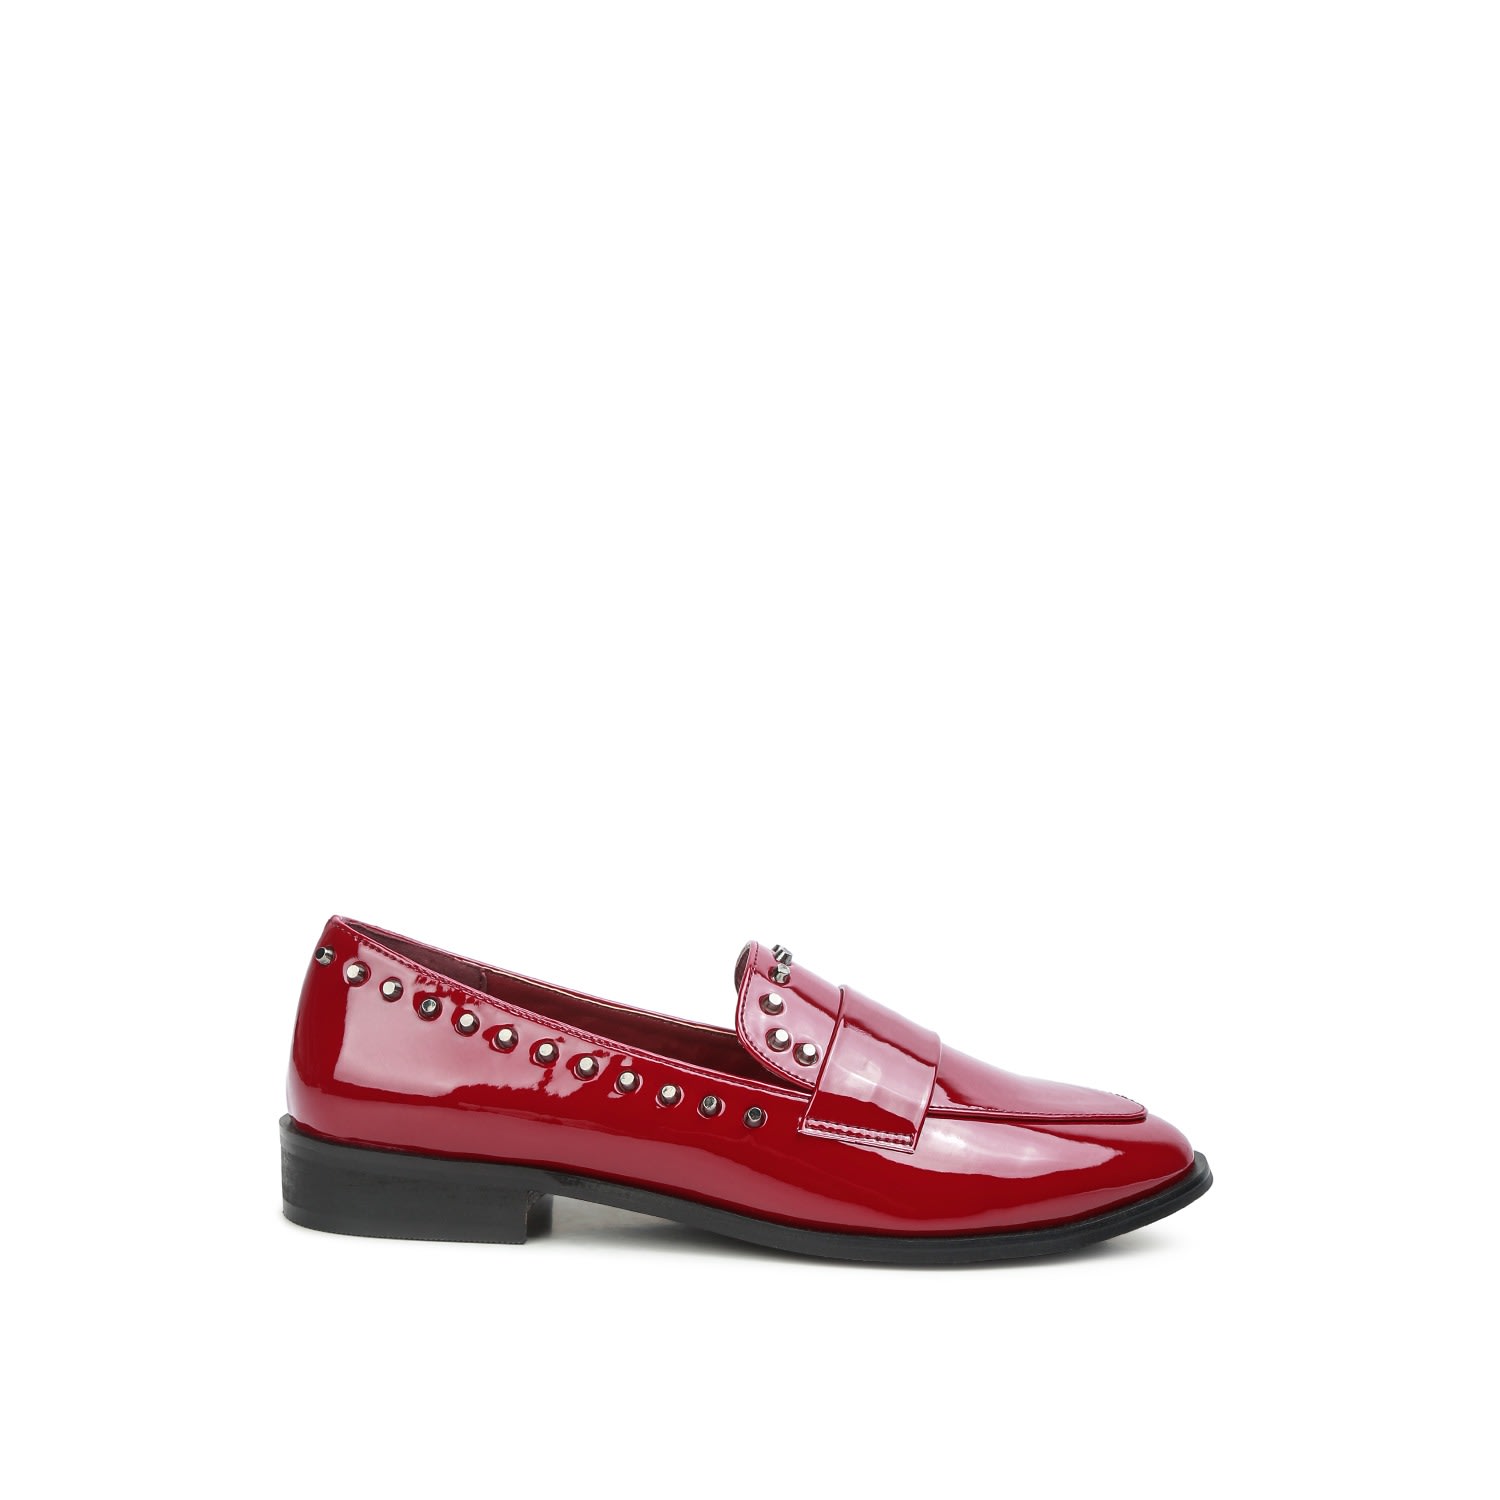 Rag & Co Women's Red Emilia Burgundy Patent Stud Penny Loafers